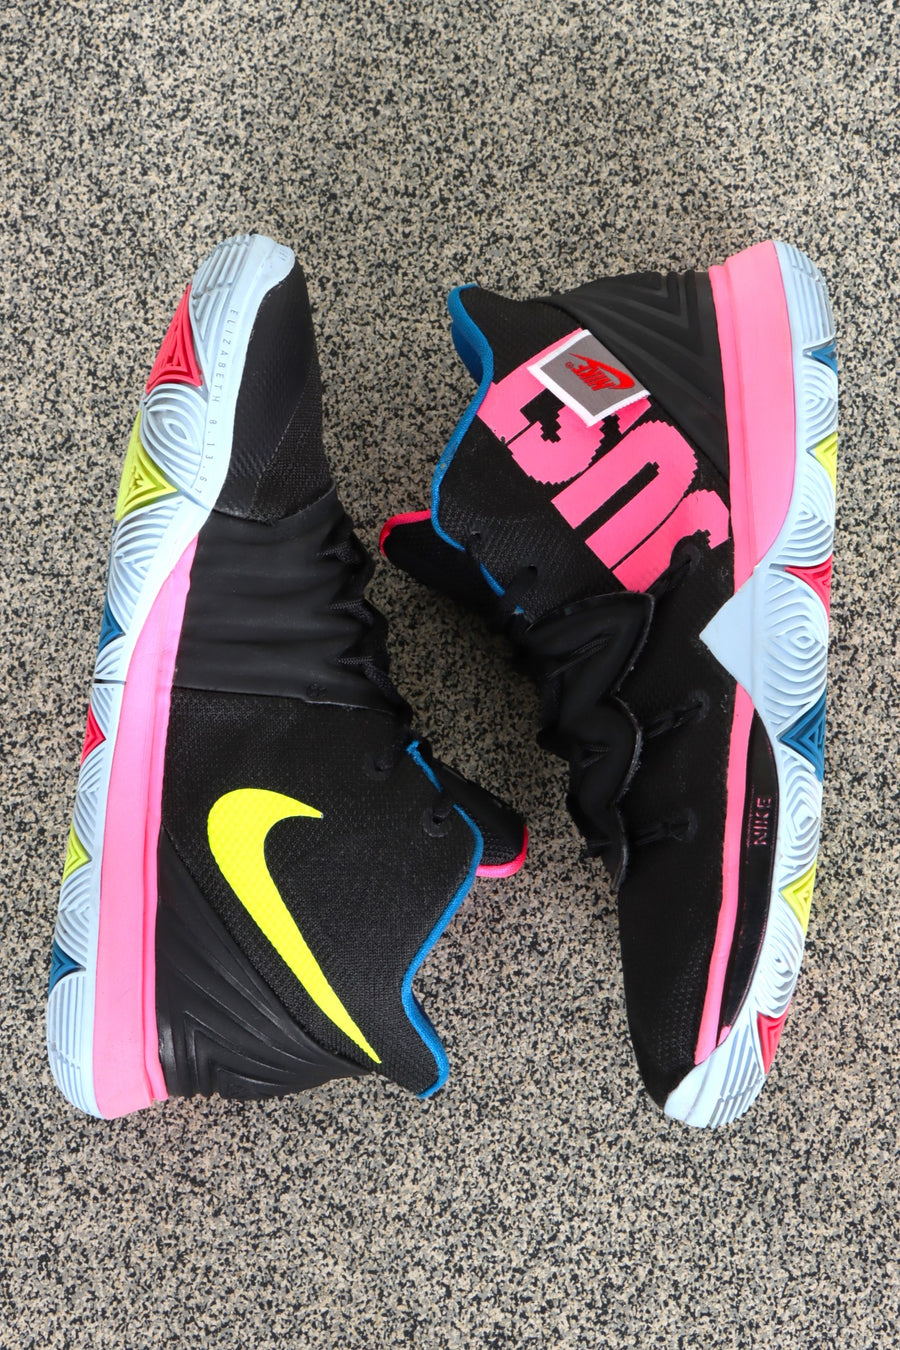 NIKE Kyrie 5 'Just Do It' Sneakers (7)